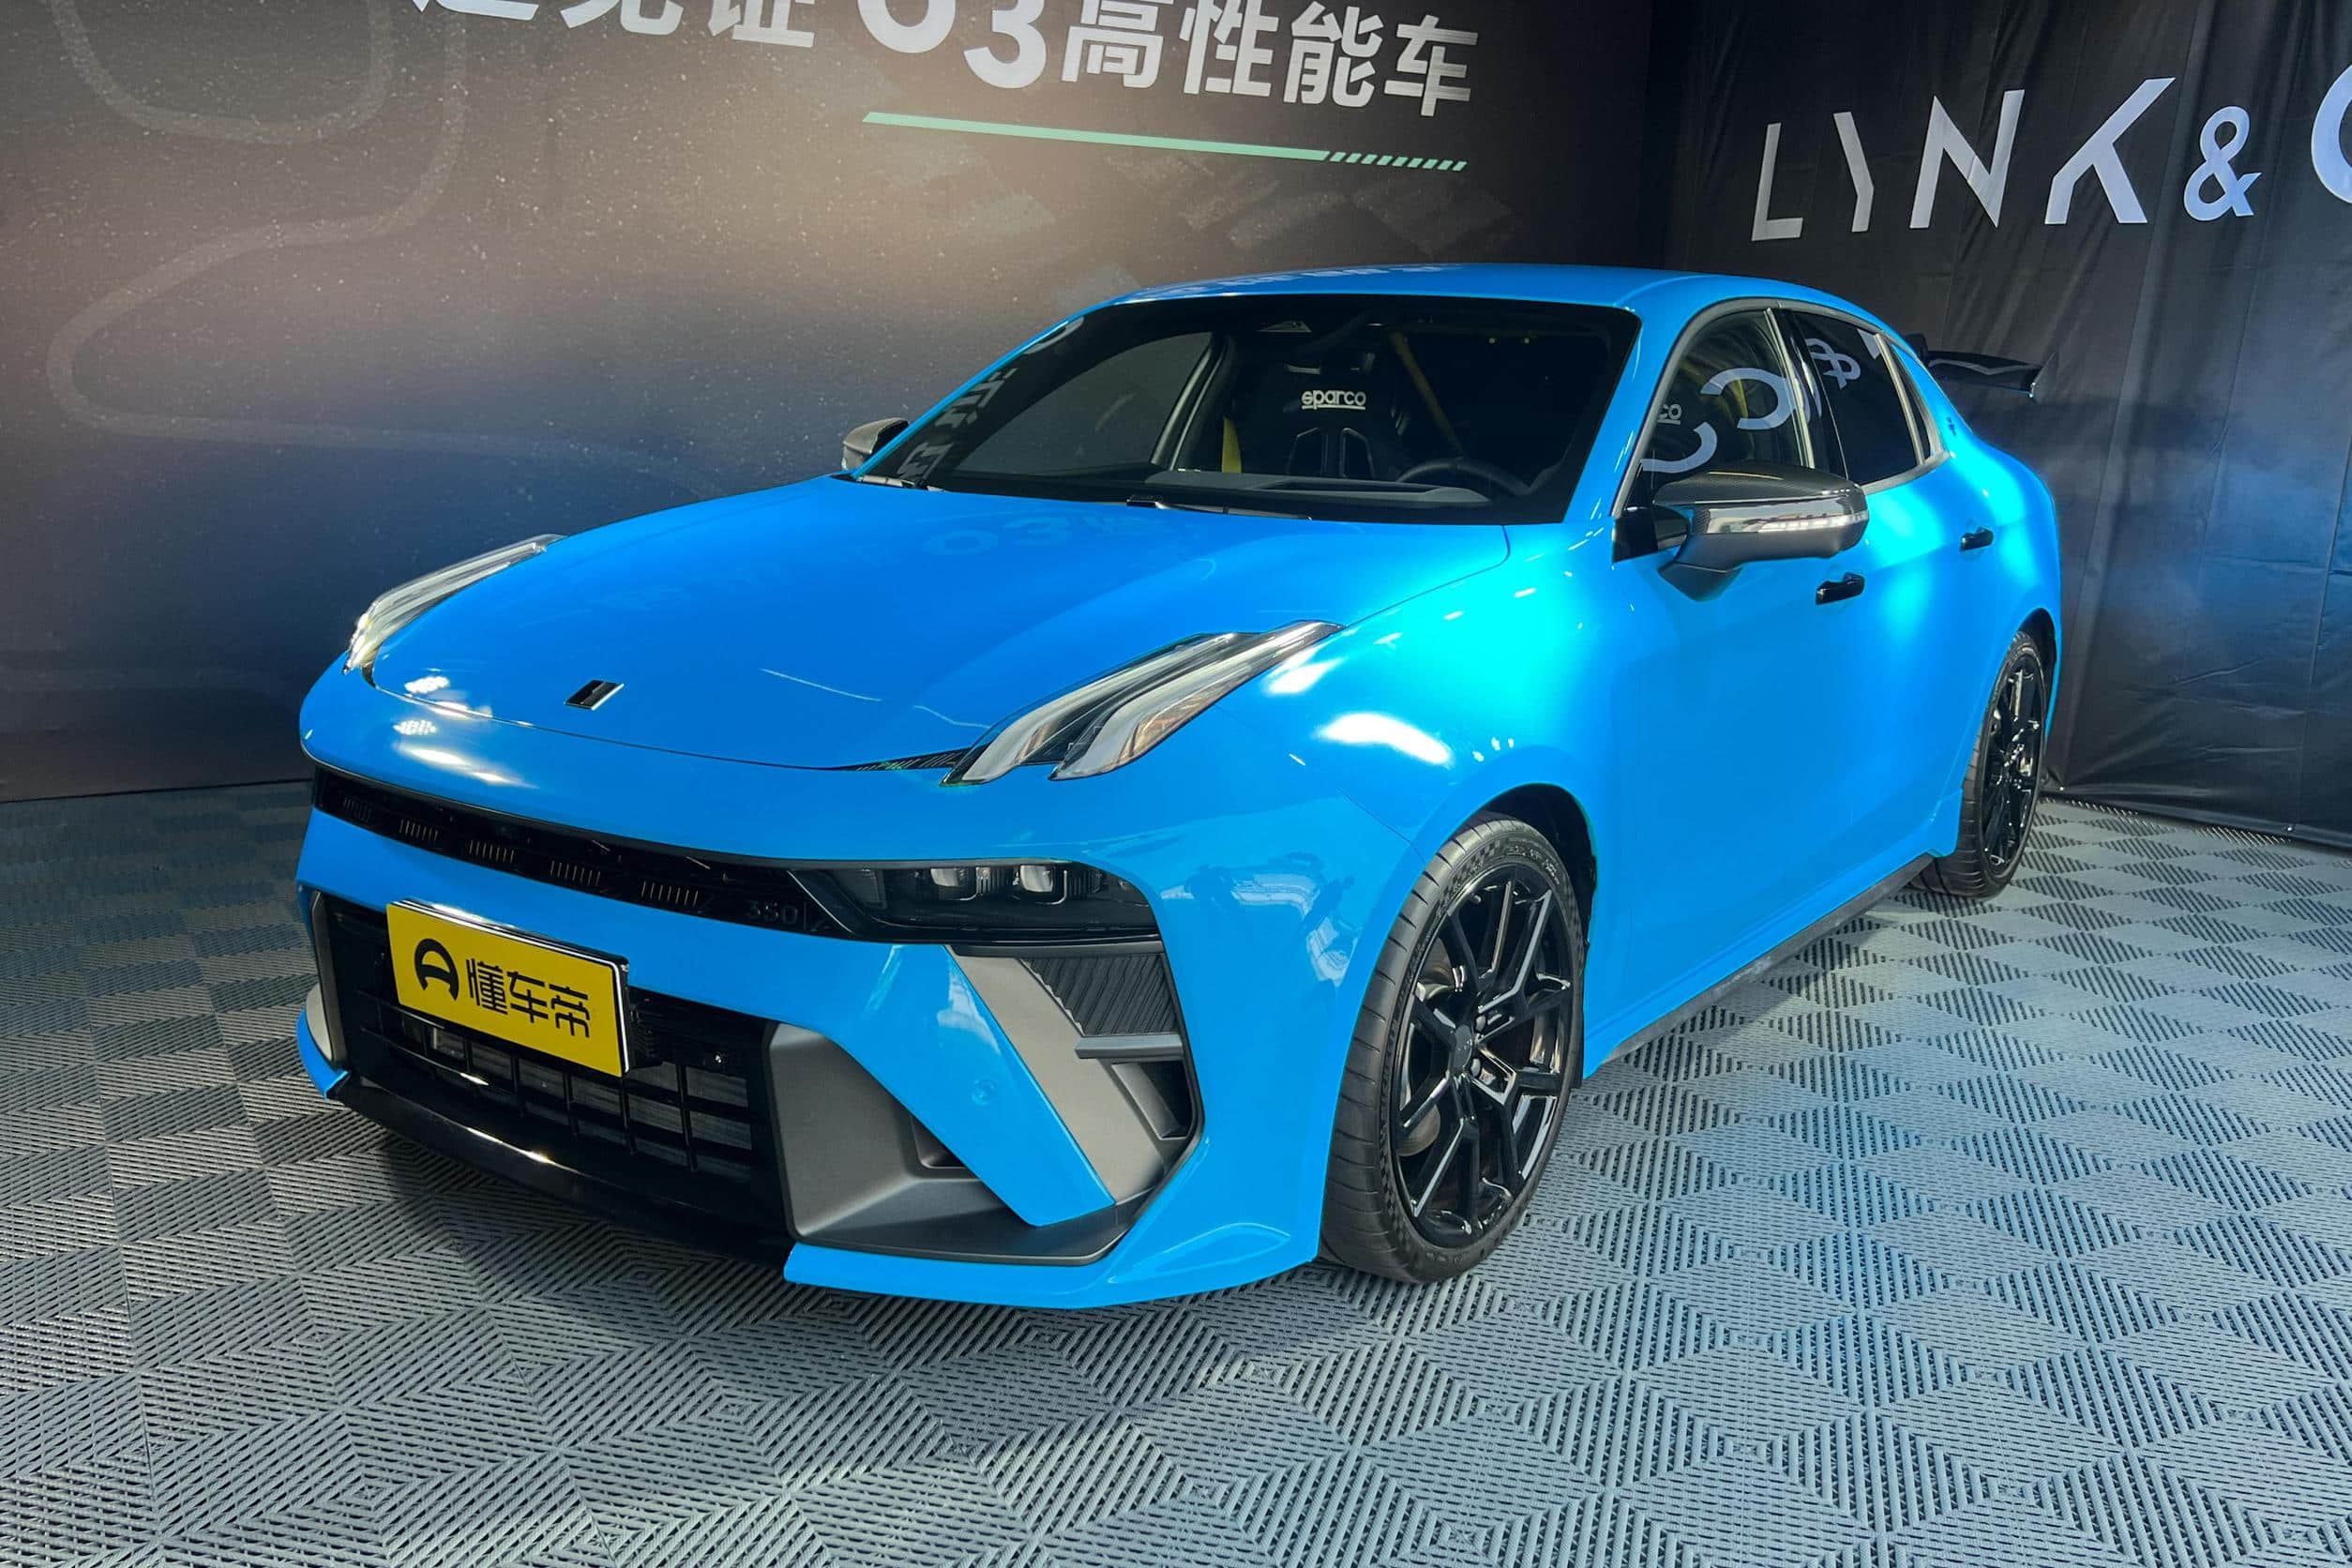 Does China’s most powerful performance car get an extra +?